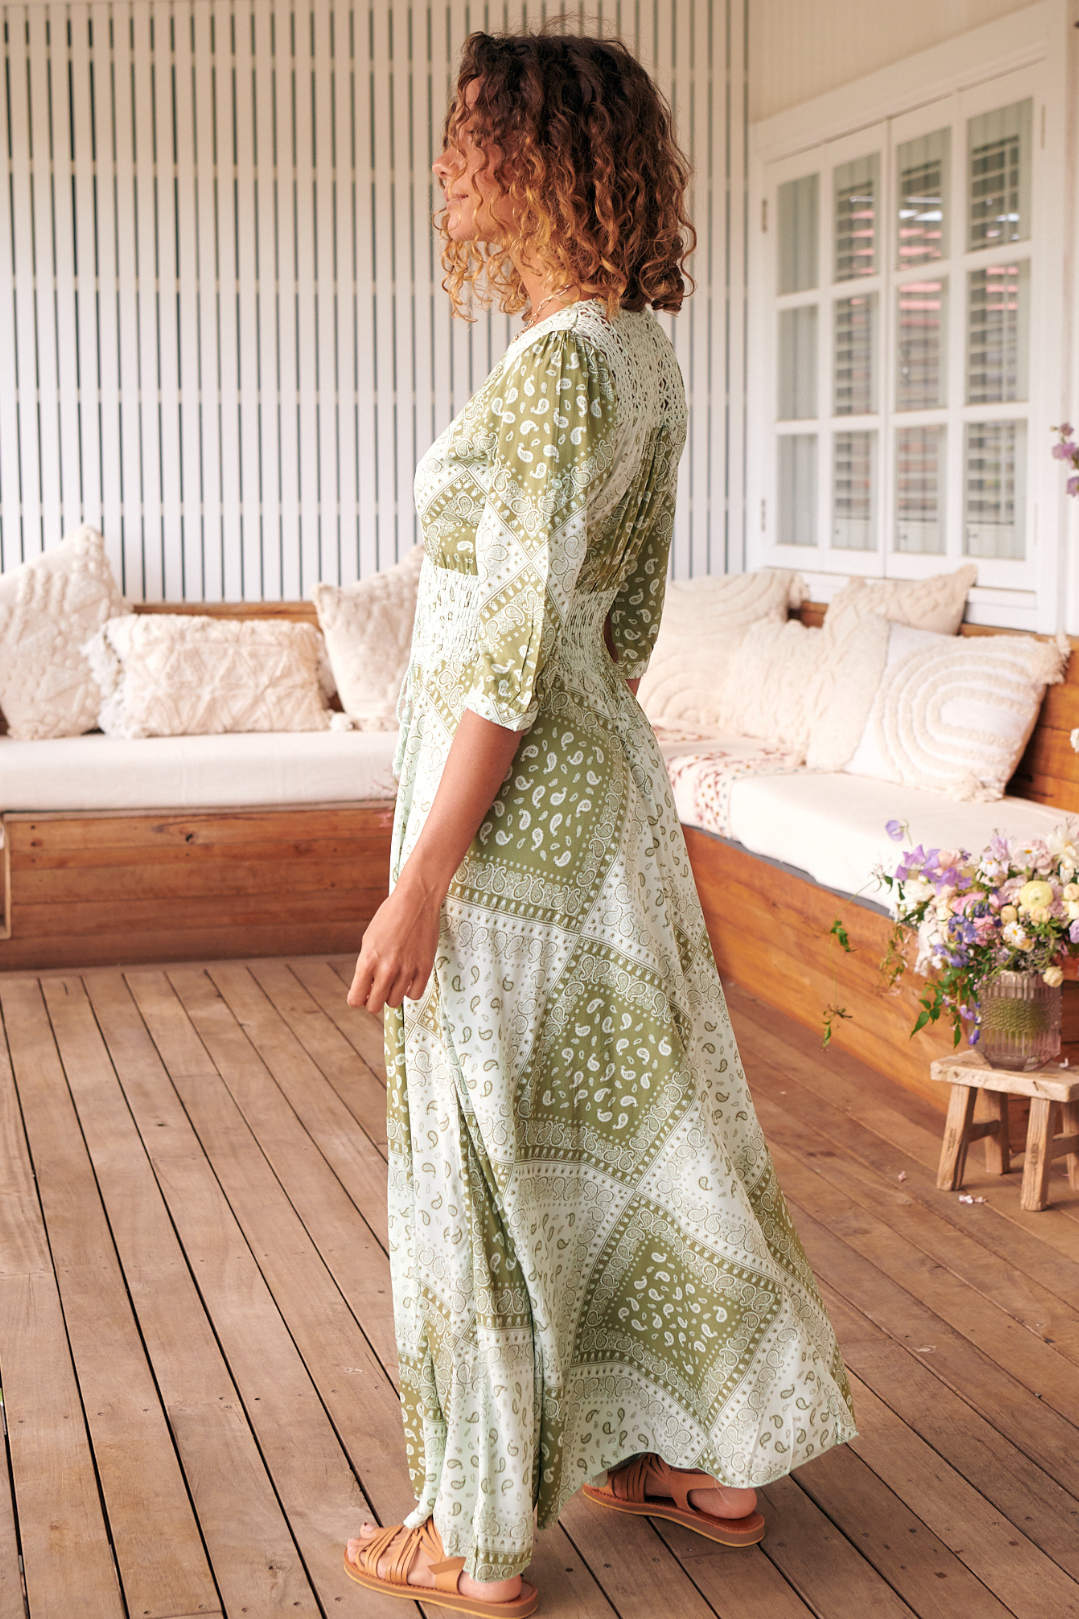 JAASE - Indiana Maxi Dress: Lace Back Shirred Waist A Line Dress with Handkercheif Hemline in Thyme Print